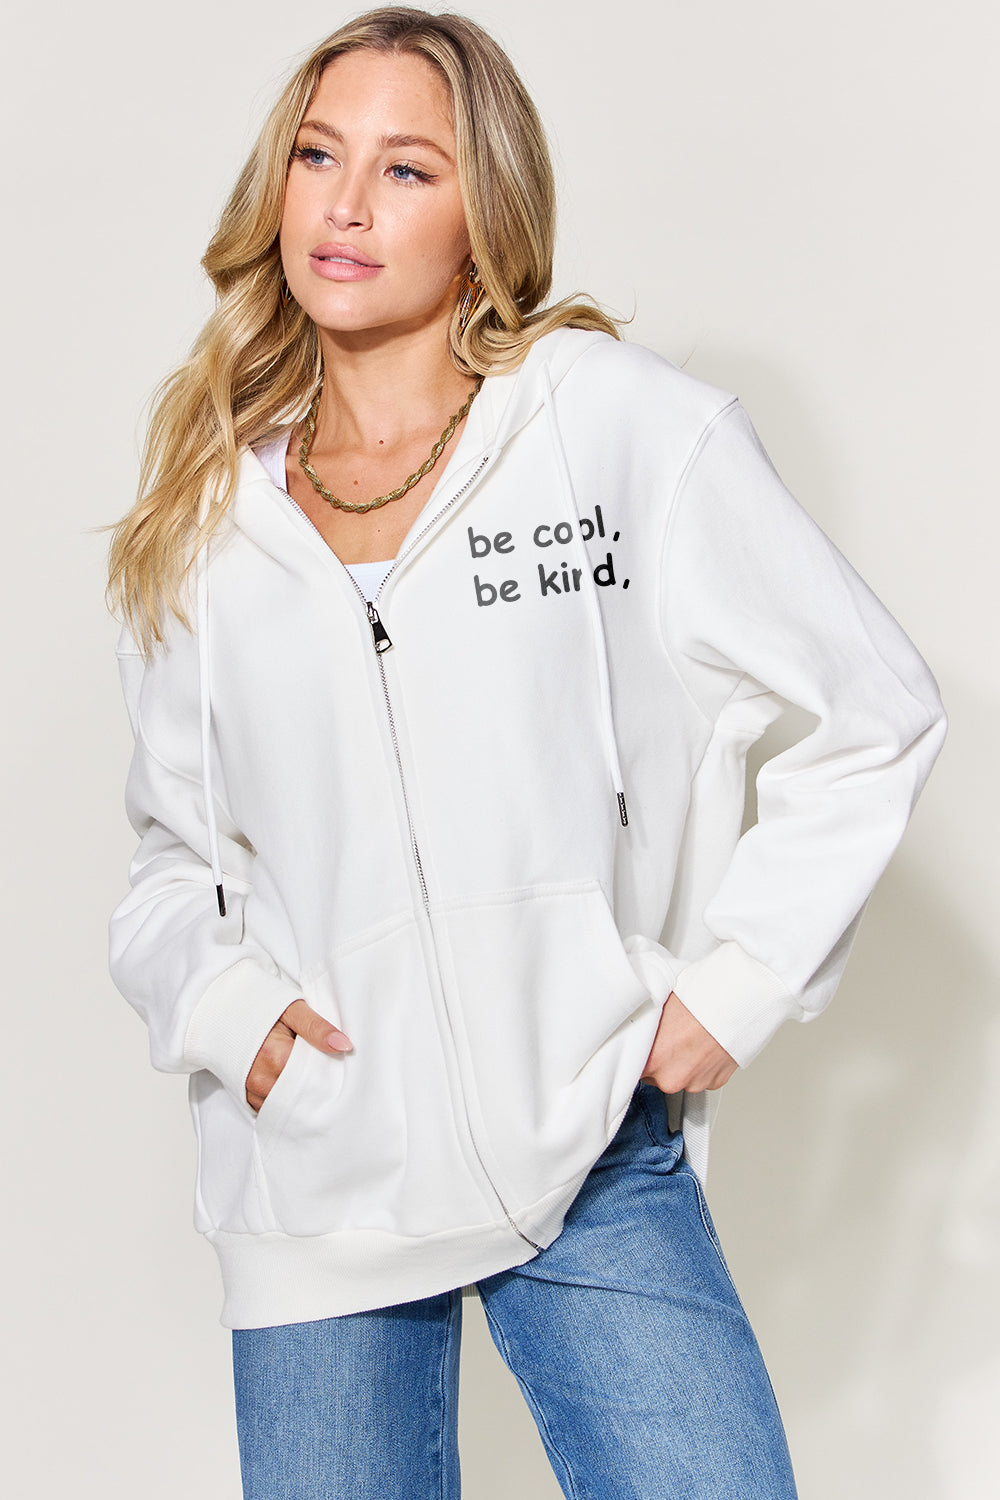 Simply Love Full Size Letter Graphic Zip Up Hoodie White Sweatshirts & Hoodies JT's Designer Fashion